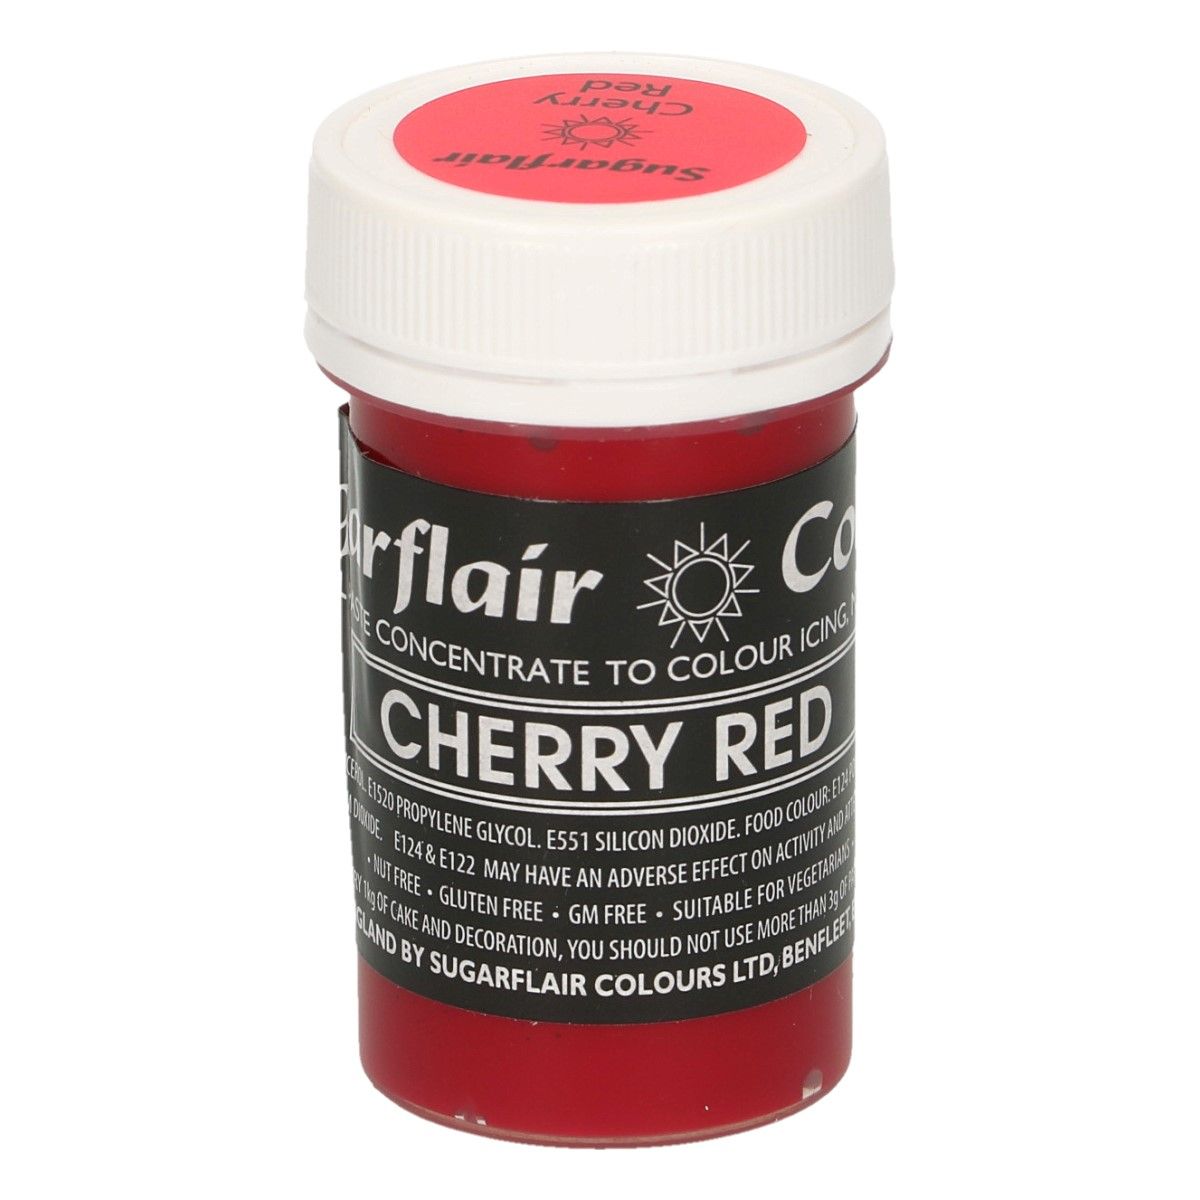 Sugarflair Pastel Colour Cherry Red 25g